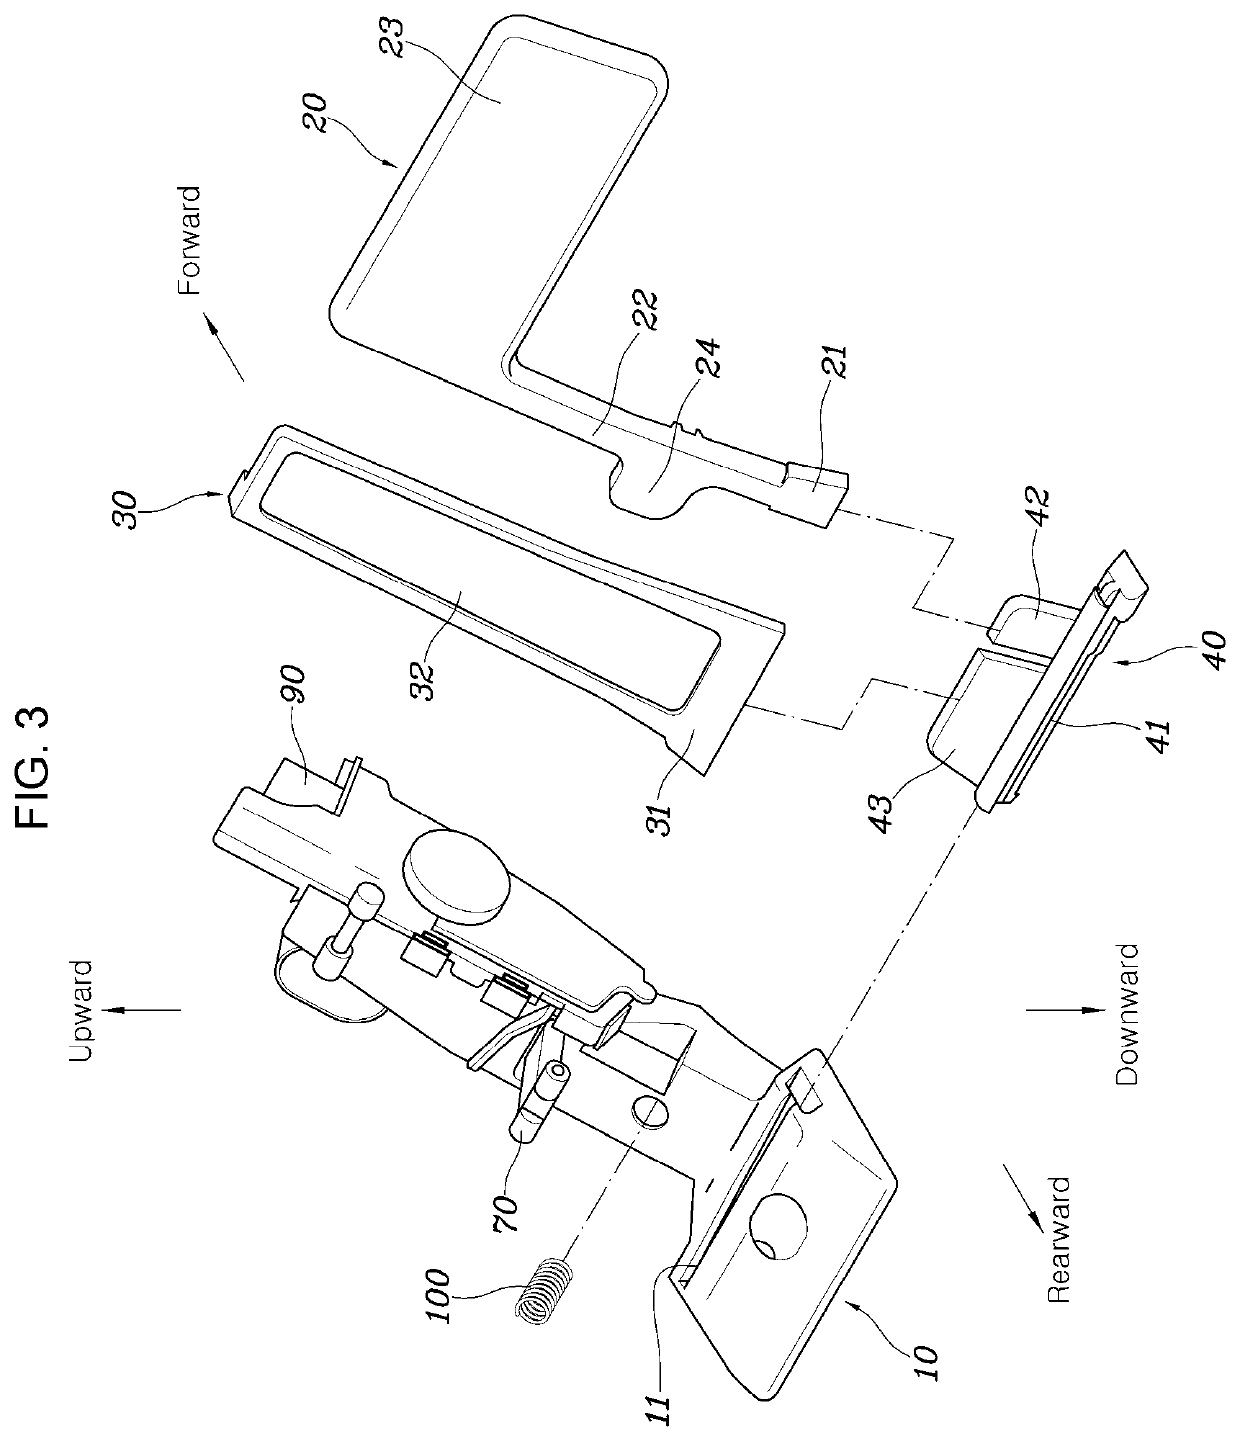 Pedal apparatus for vehicle